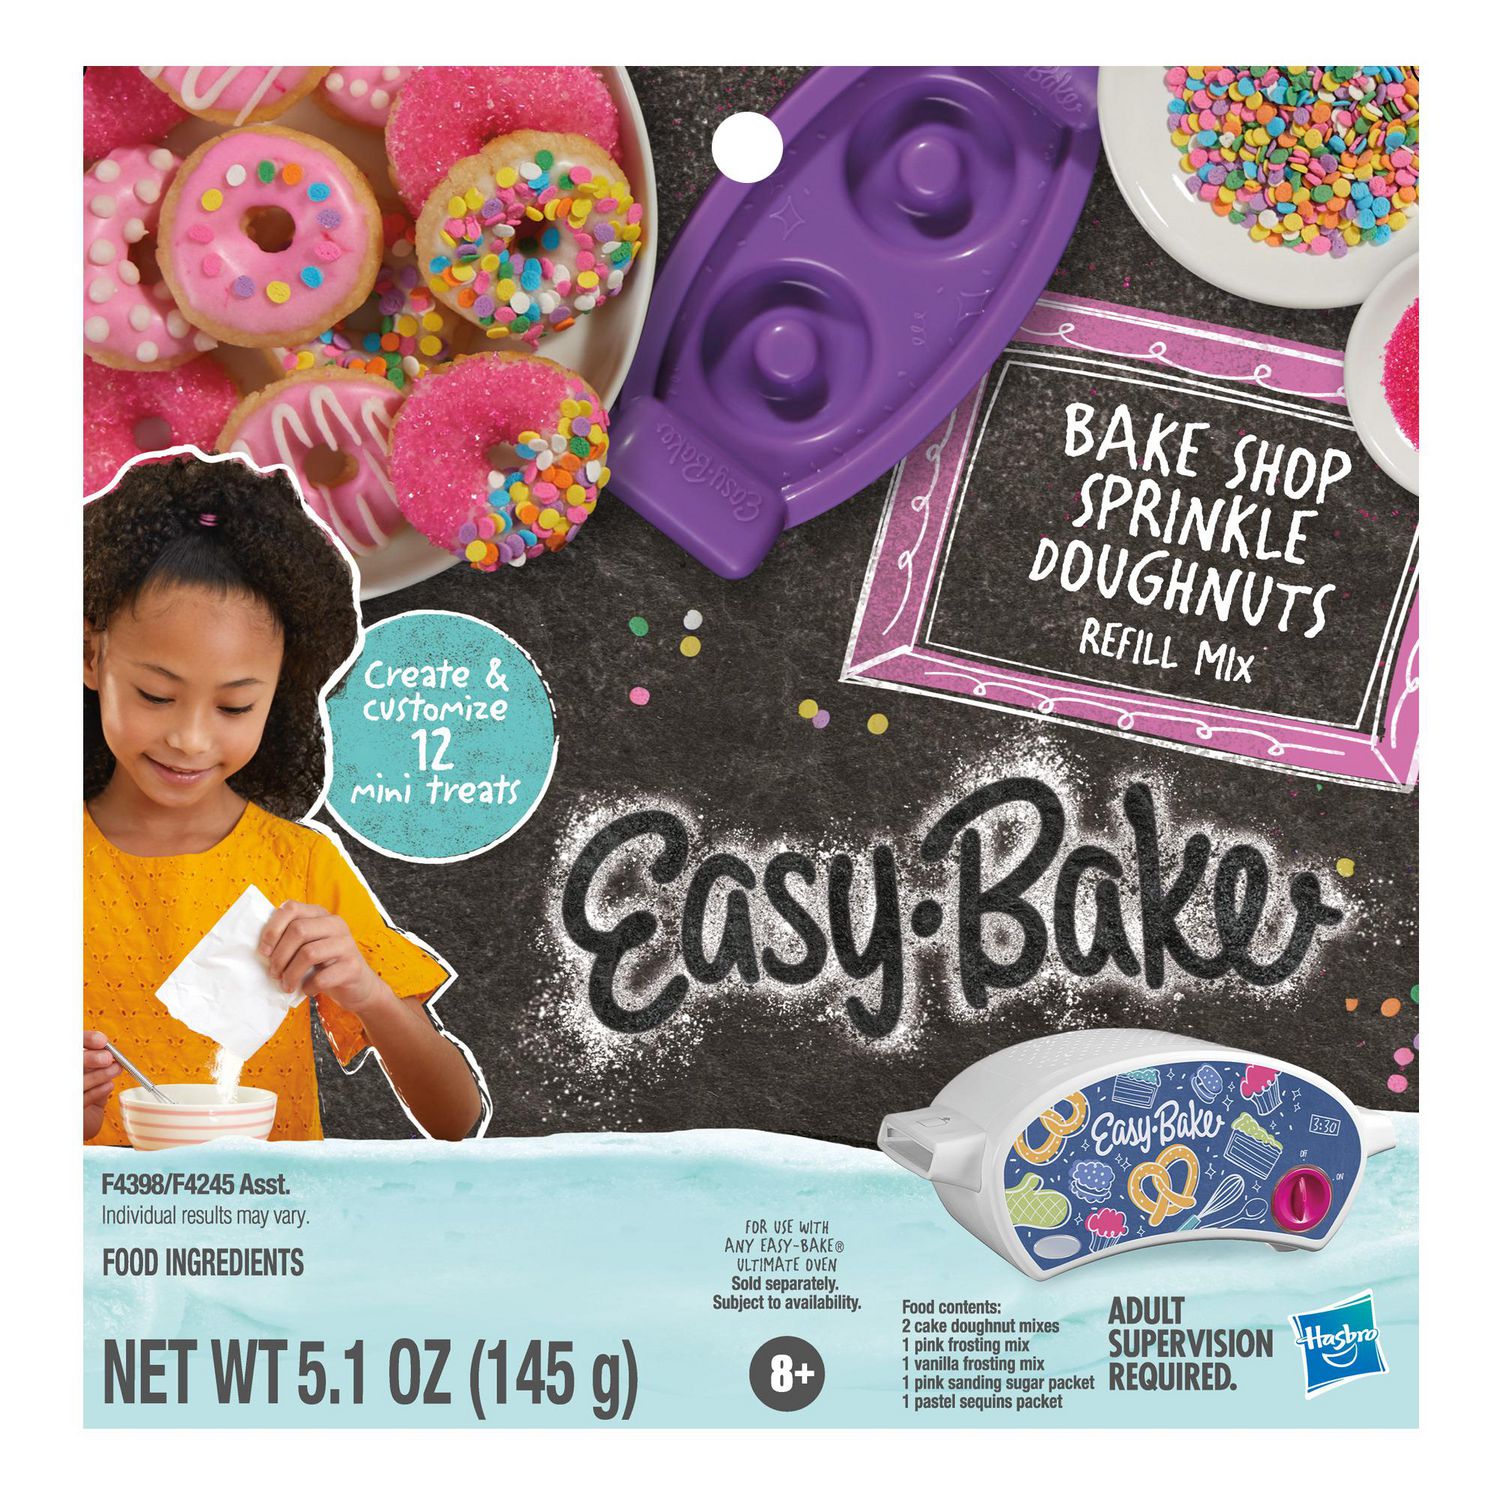 Best Easy Bake Oven And Accessories for sale in Yorkville, Ontario for 2024